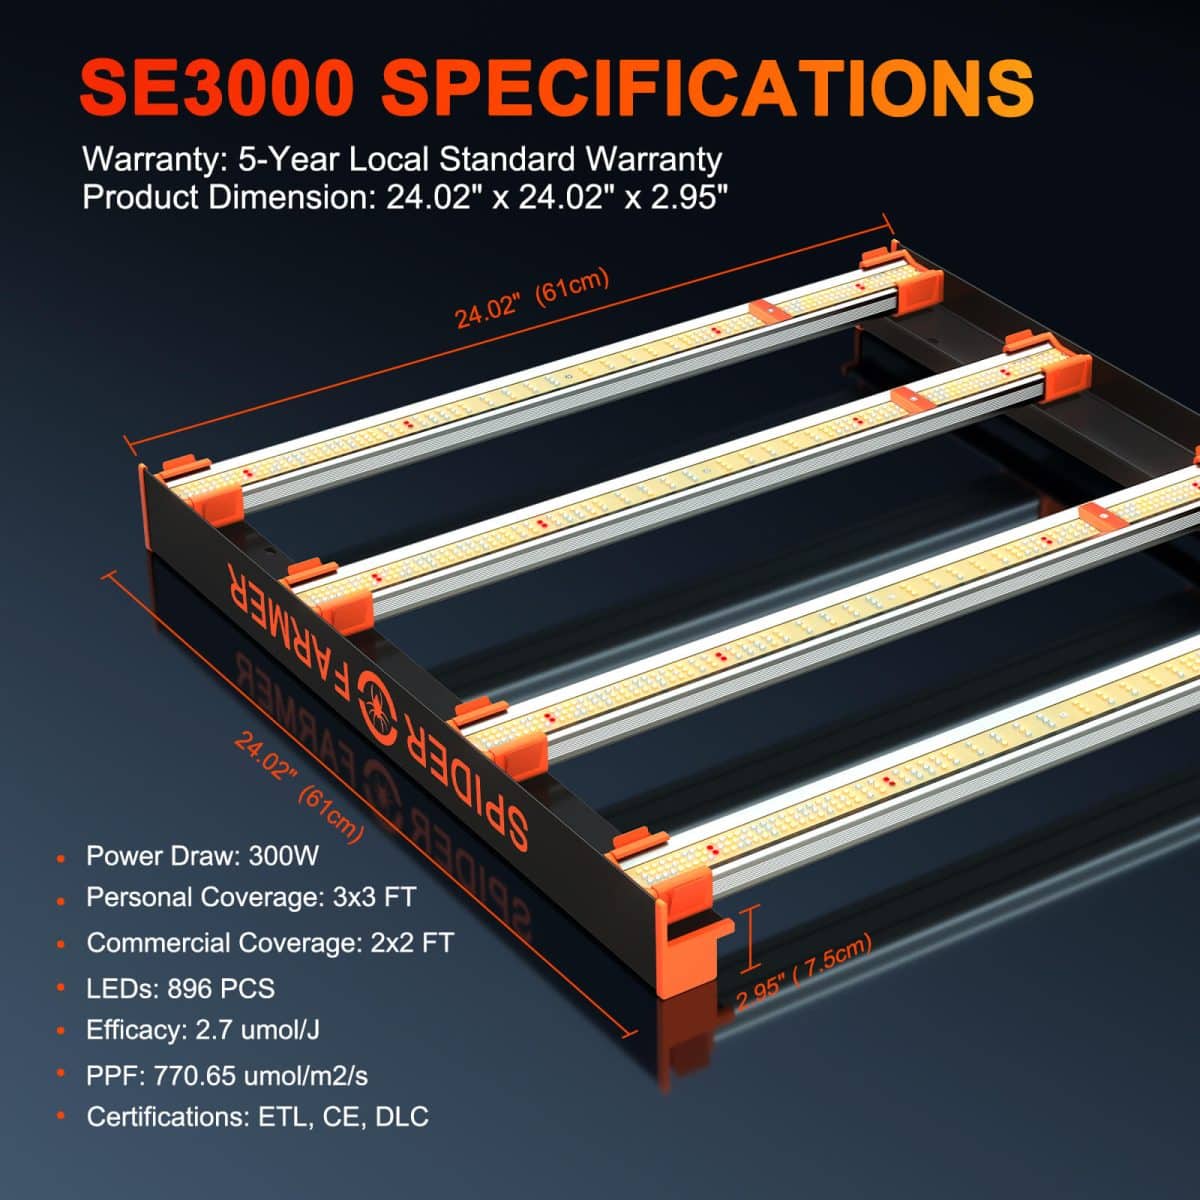 SE3000 specifications